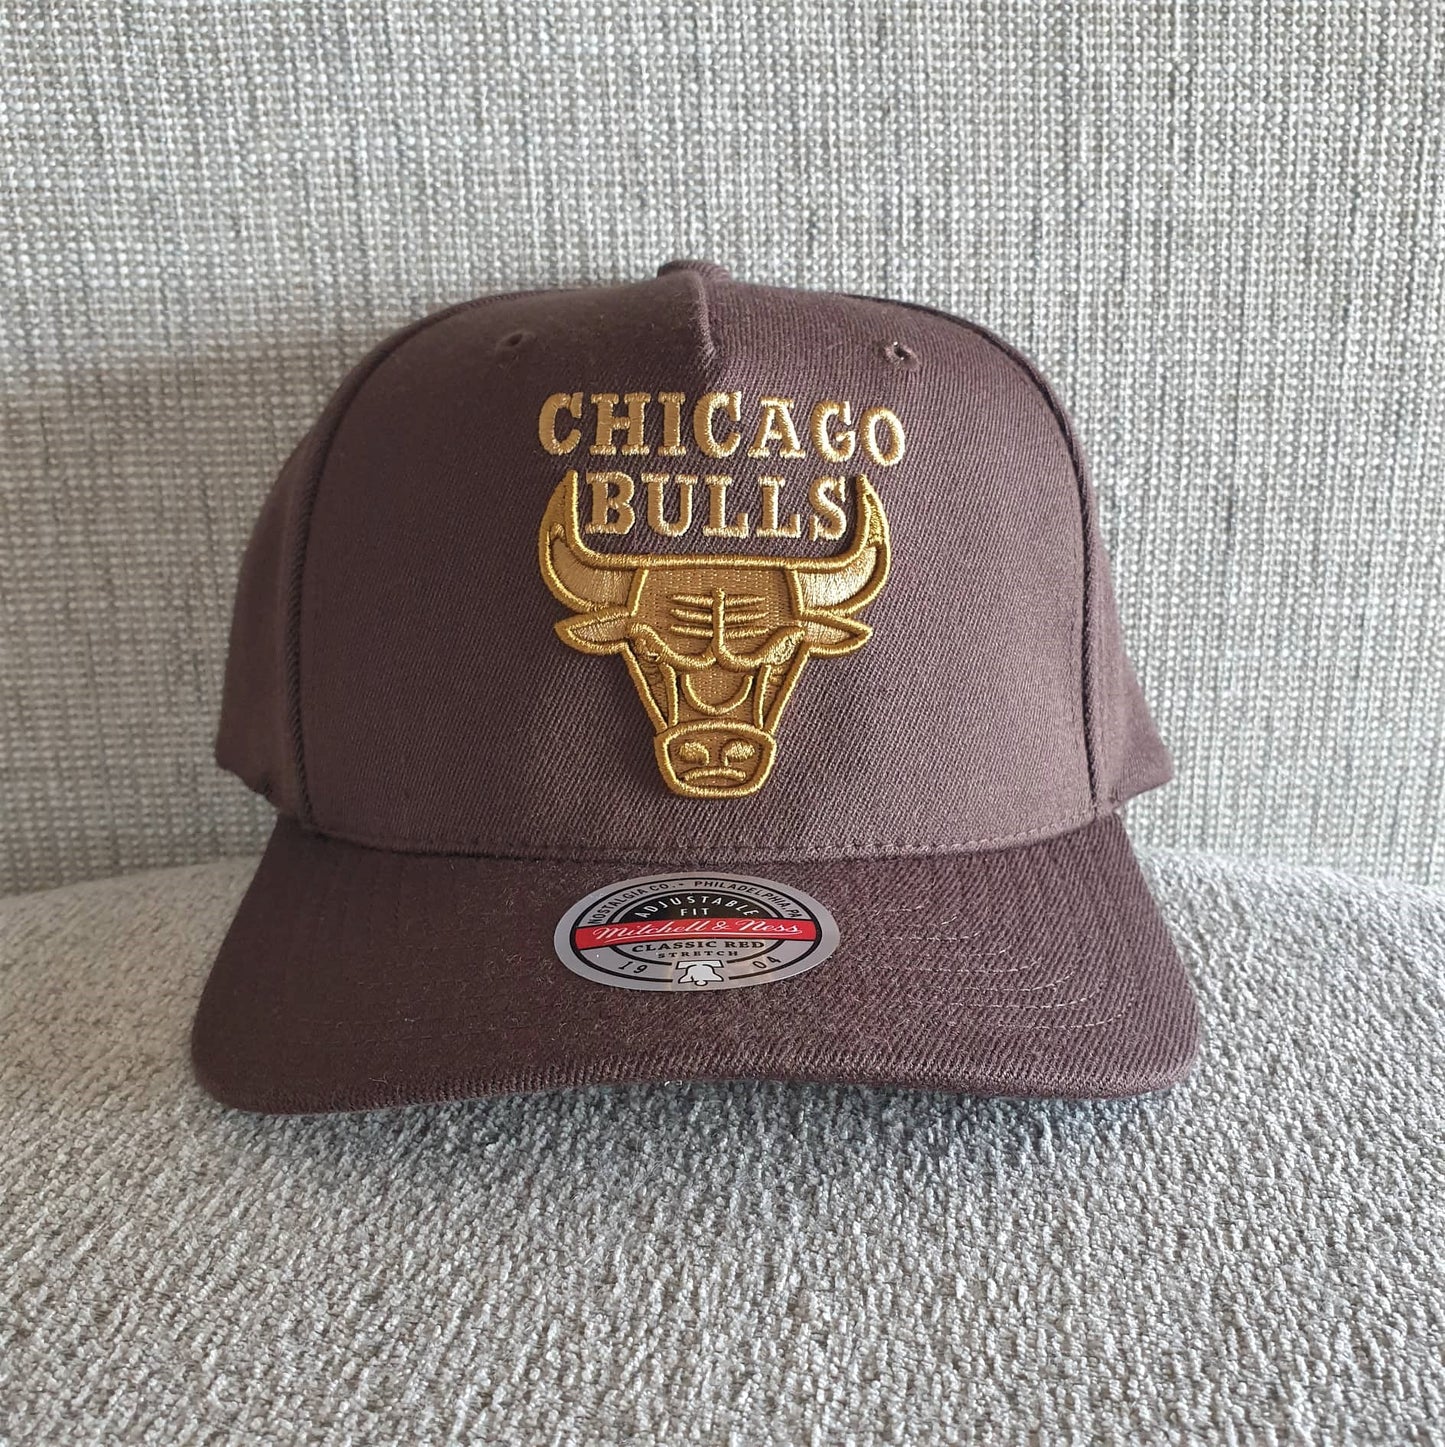 MITCHELL & NESS CHICAGO BULLS SNAPBACK - BROWN/GOLD